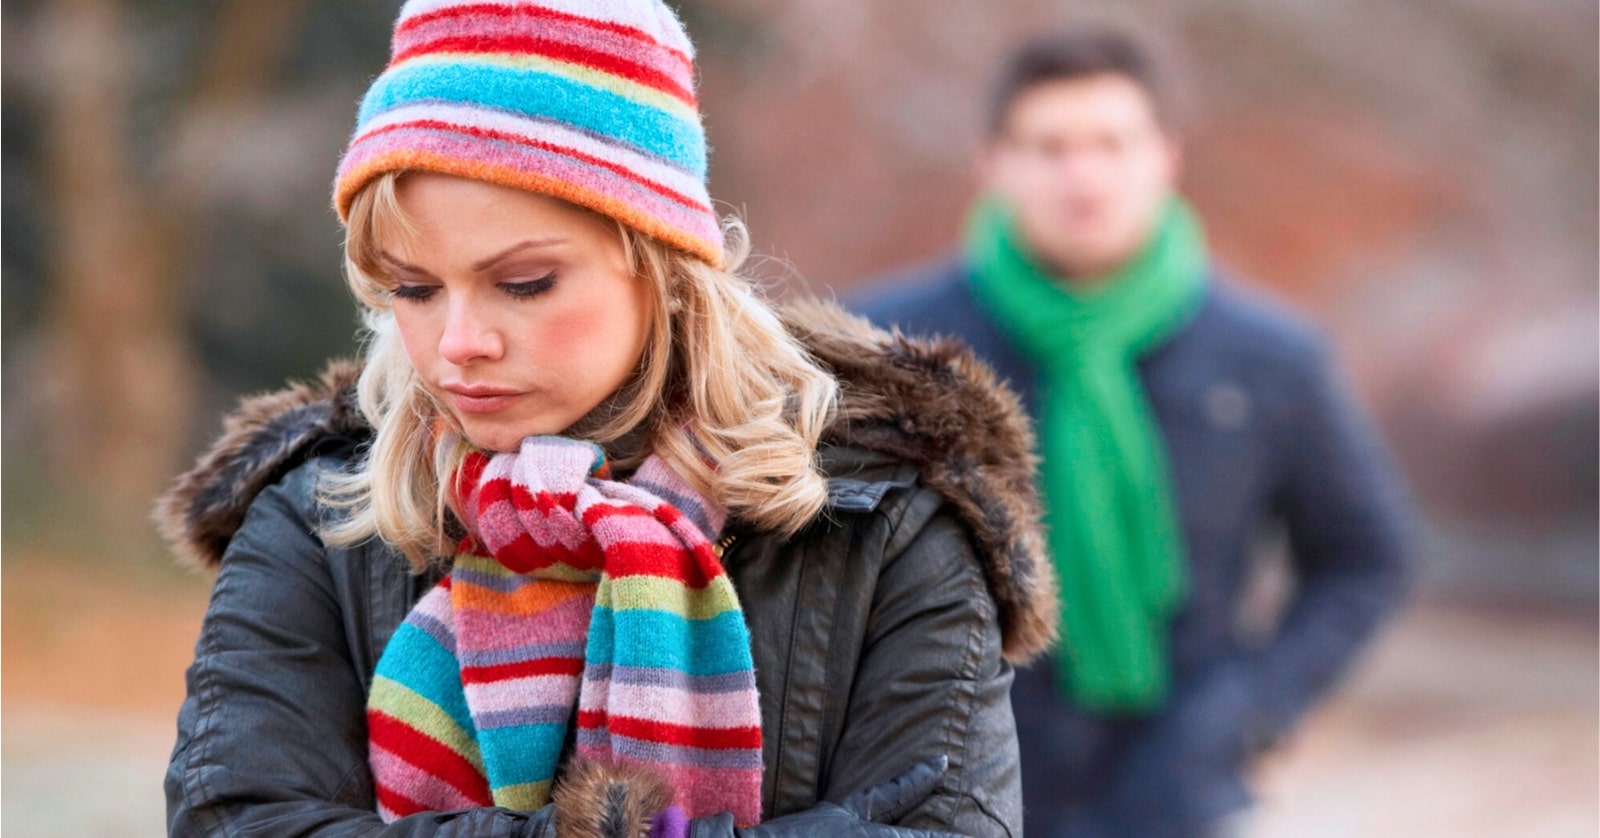 woman in the foreground wearing colorful hat and scarf with a pensive, slightly unhappy expression on her face as her boyfriend walks behind her in the distance